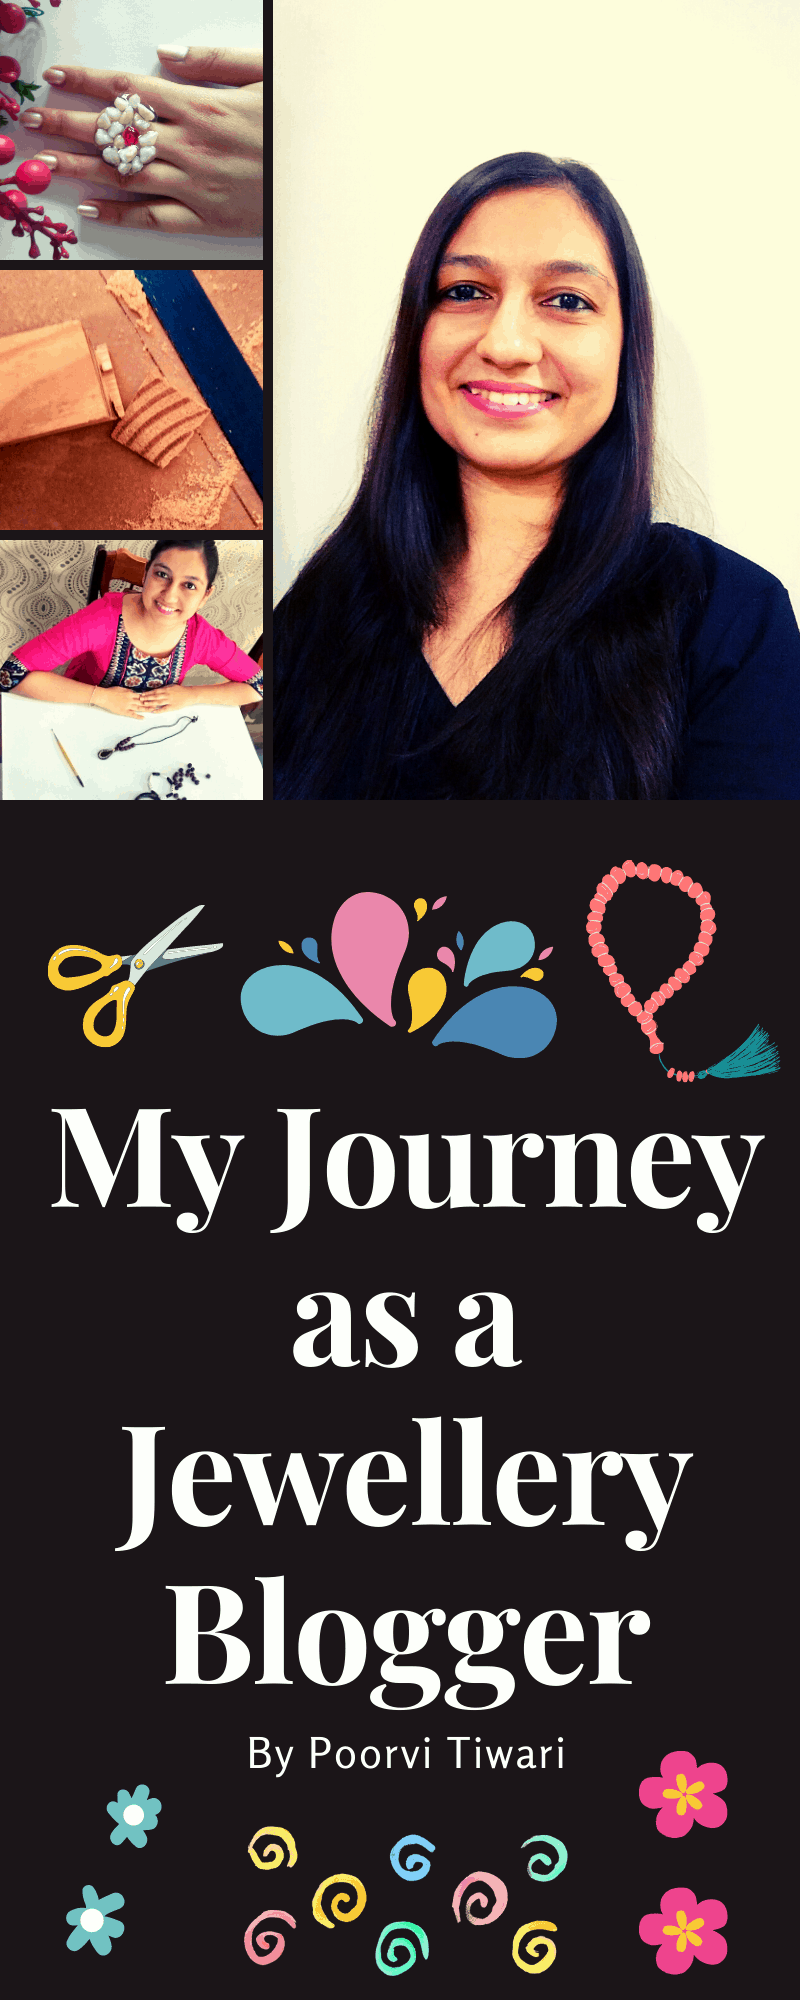 My Journey as a Jewellery Blogger